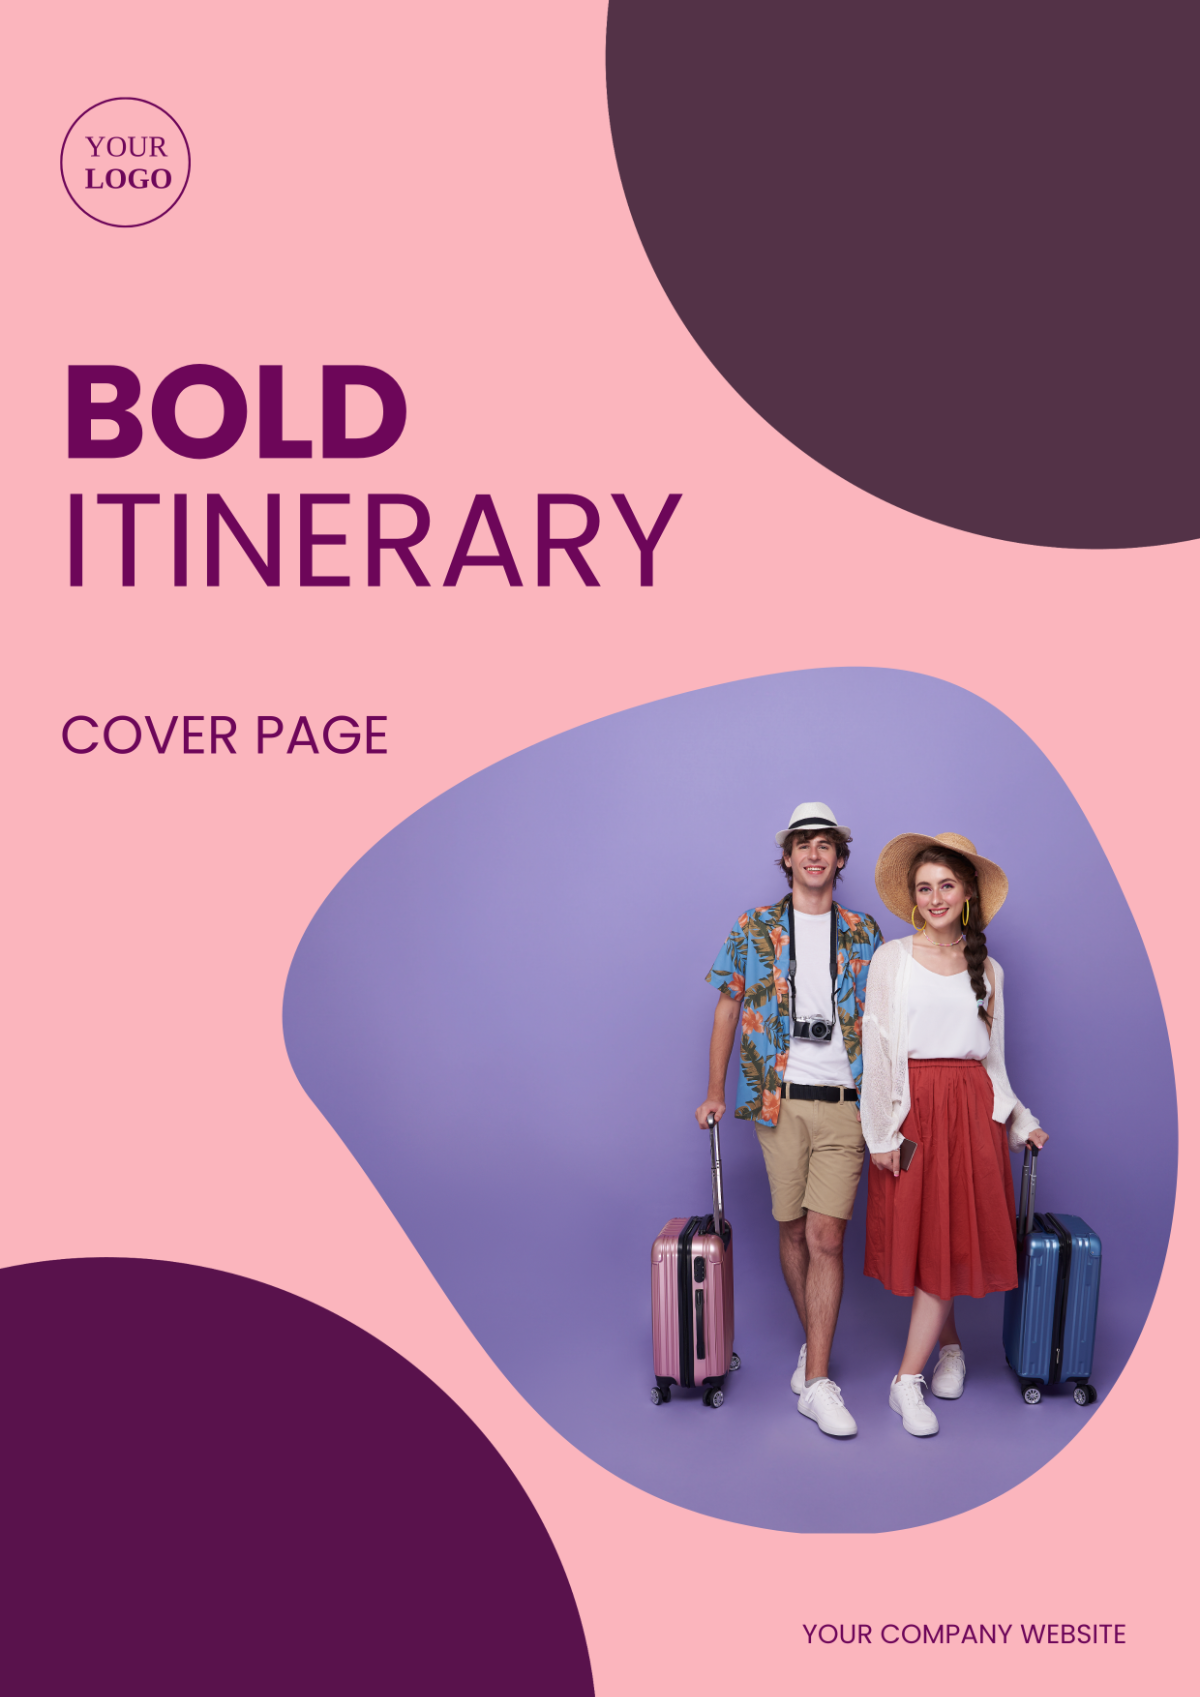 Bold Itinerary Cover Page